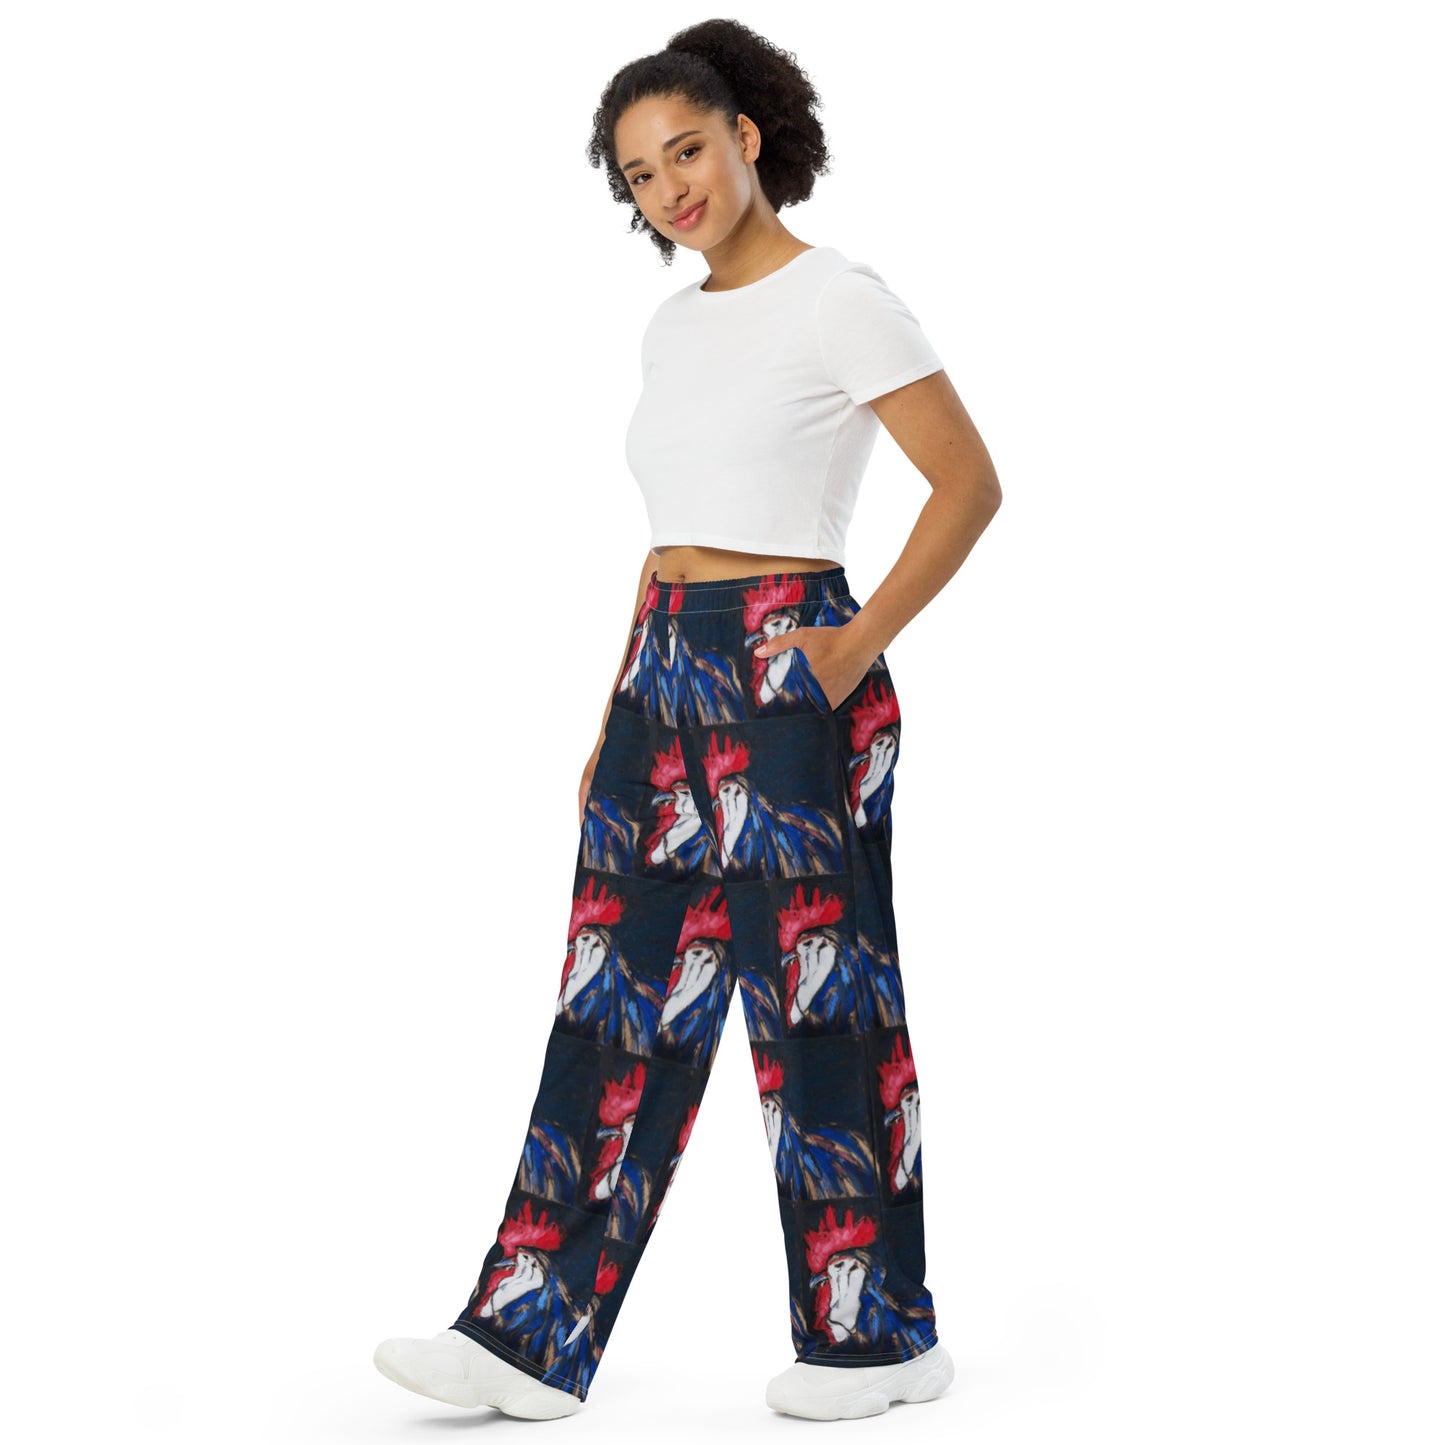 Tribute to Heritage Poultry All-over print unisex wide-leg pants